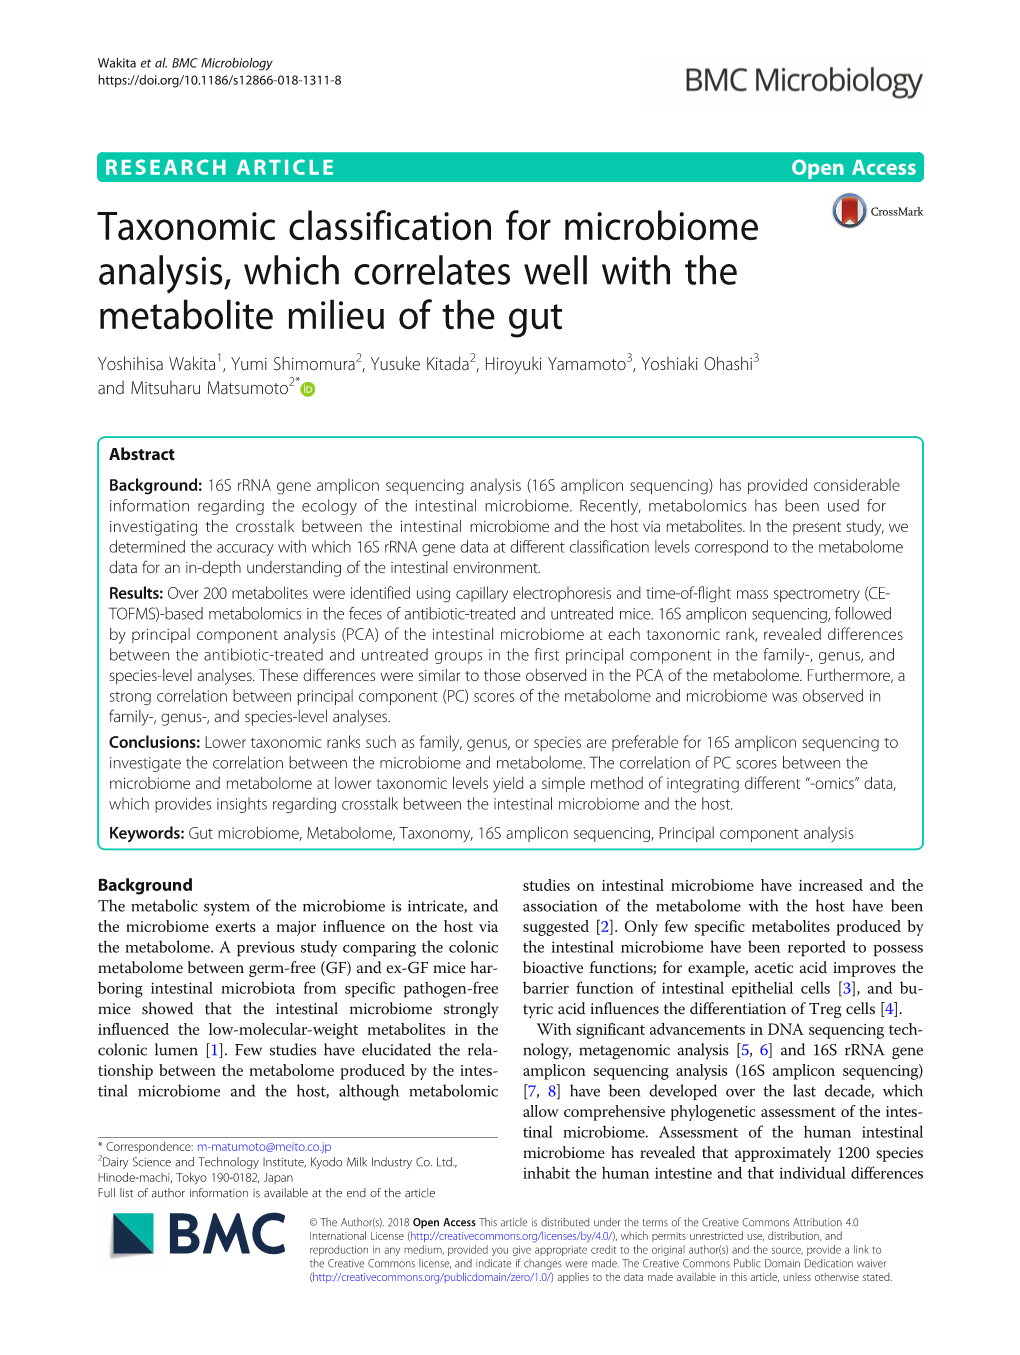 Taxonomic Classification for Microbiome Analysis, Which Correlates Well with the Metabolite Milieu of The